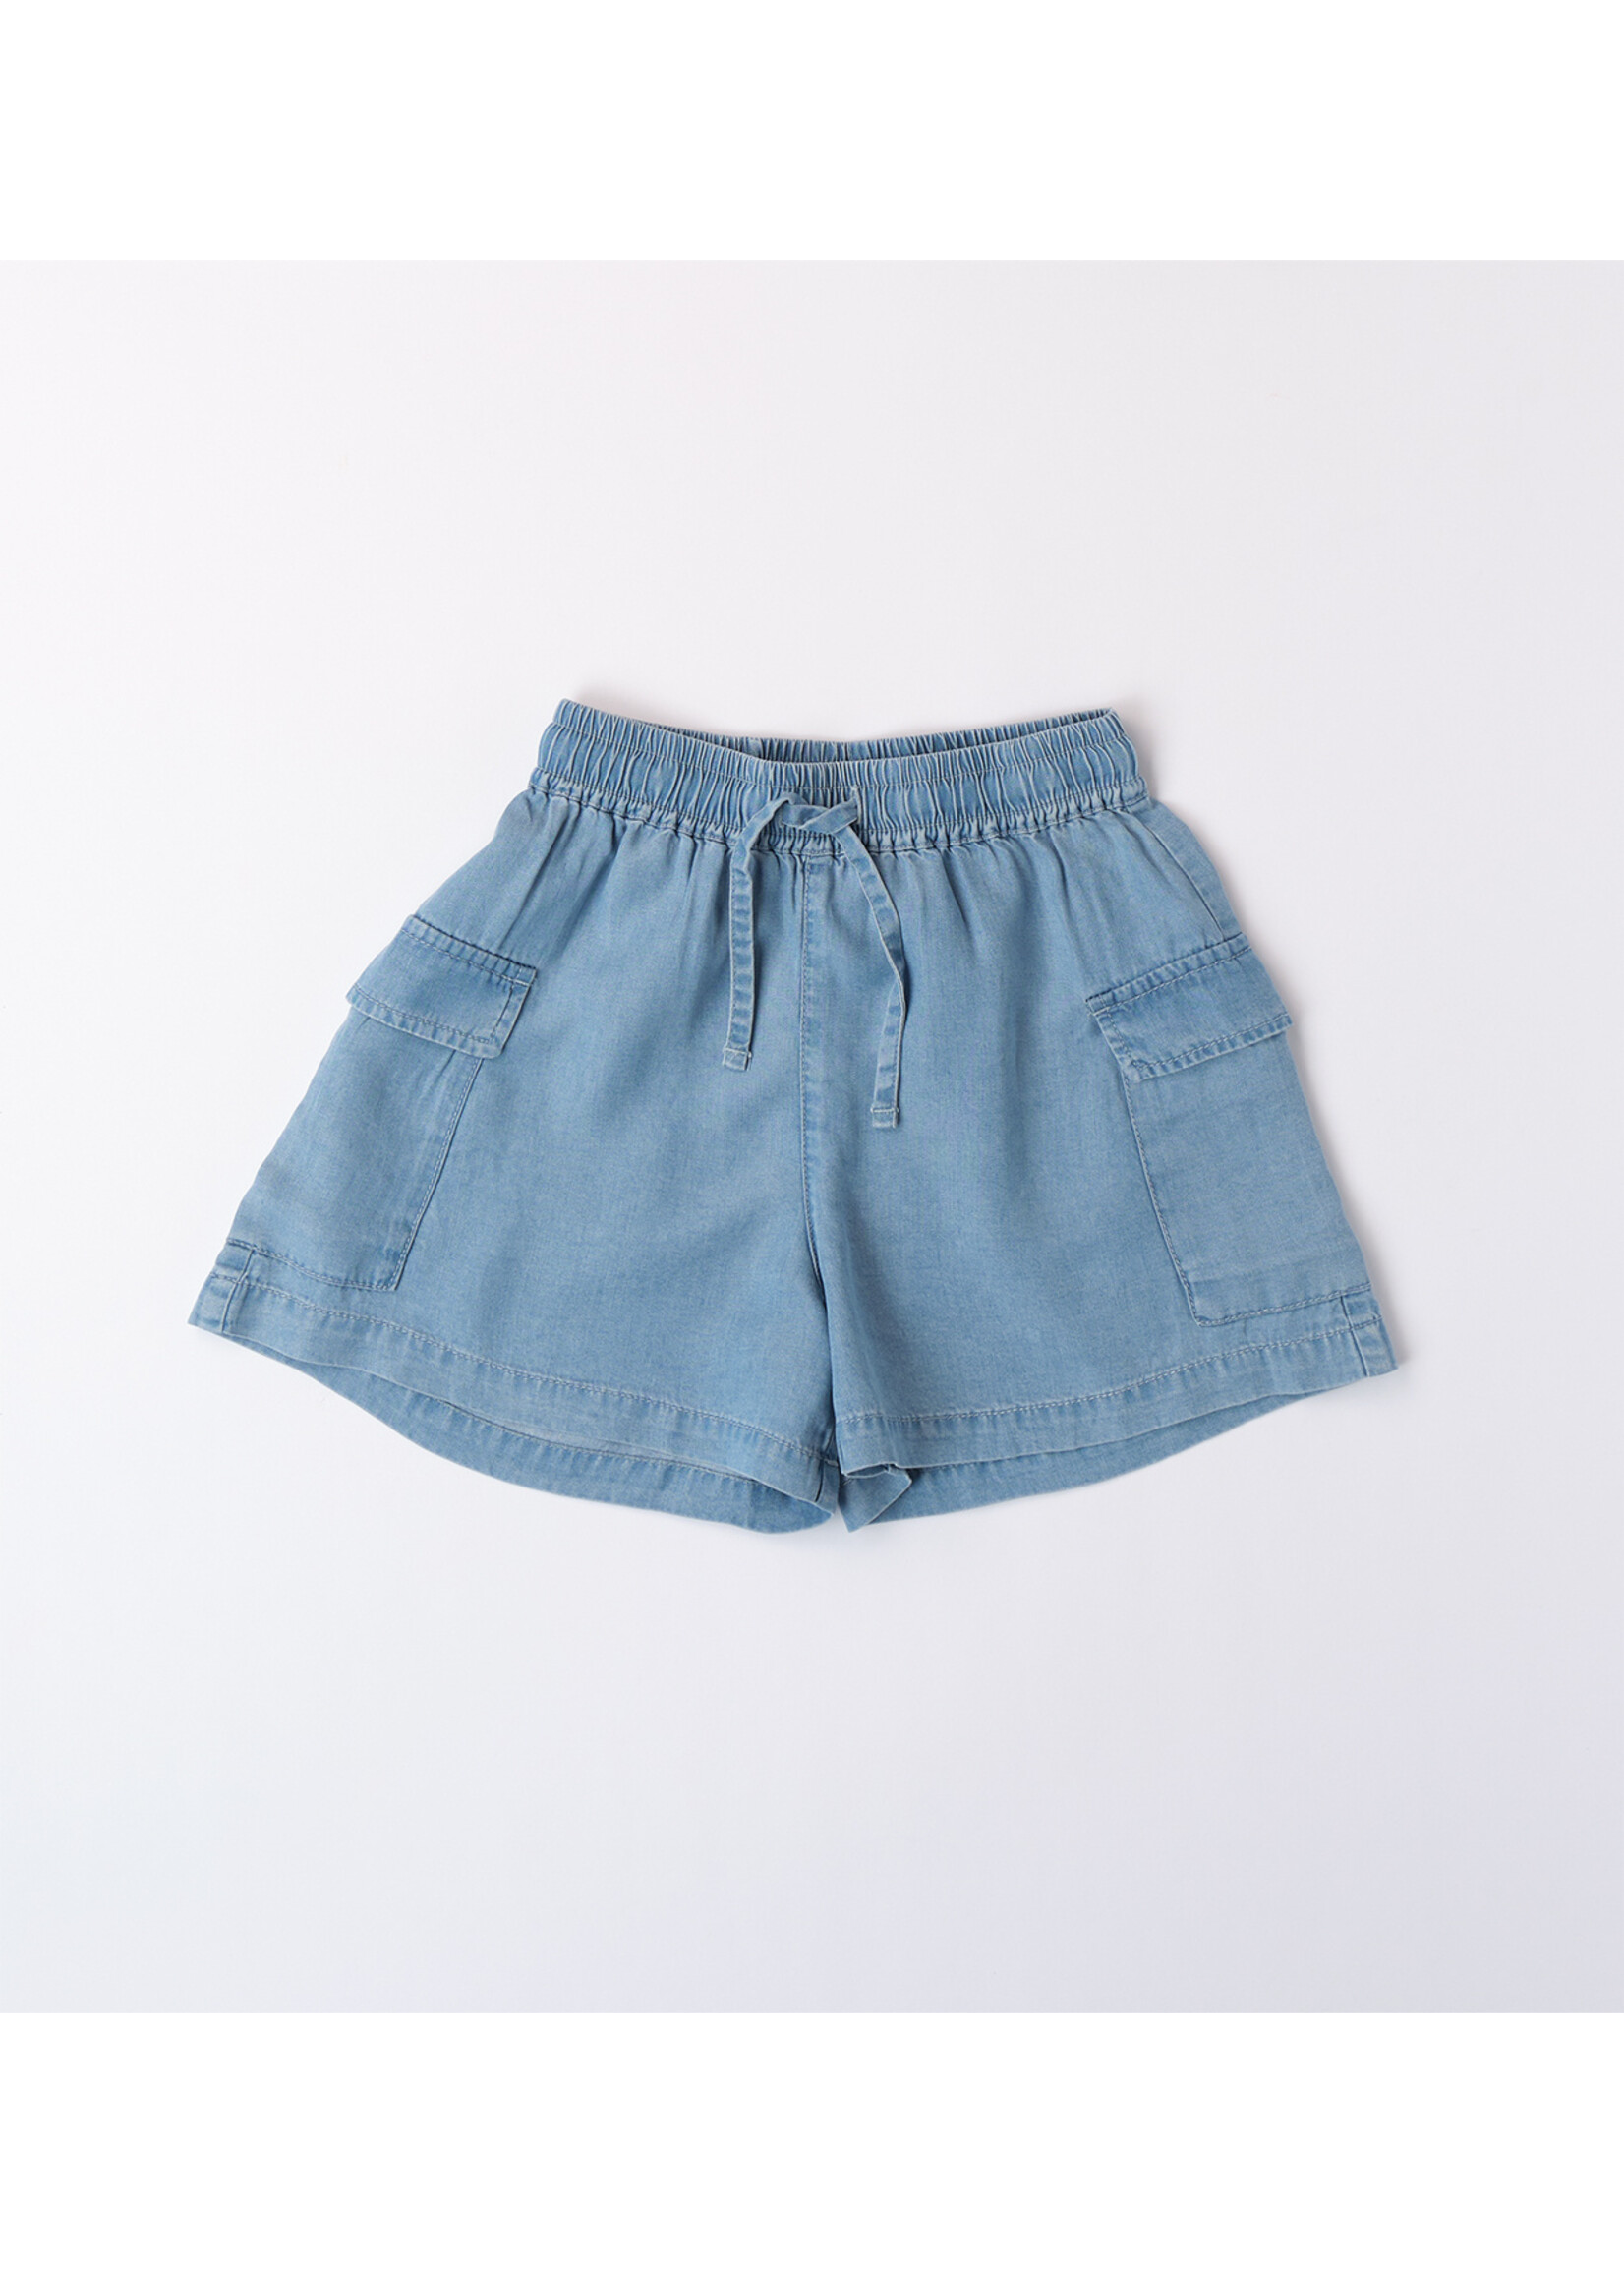 Ido 48871 SHORT WOVEN TROUSERS CLEAR WASHED